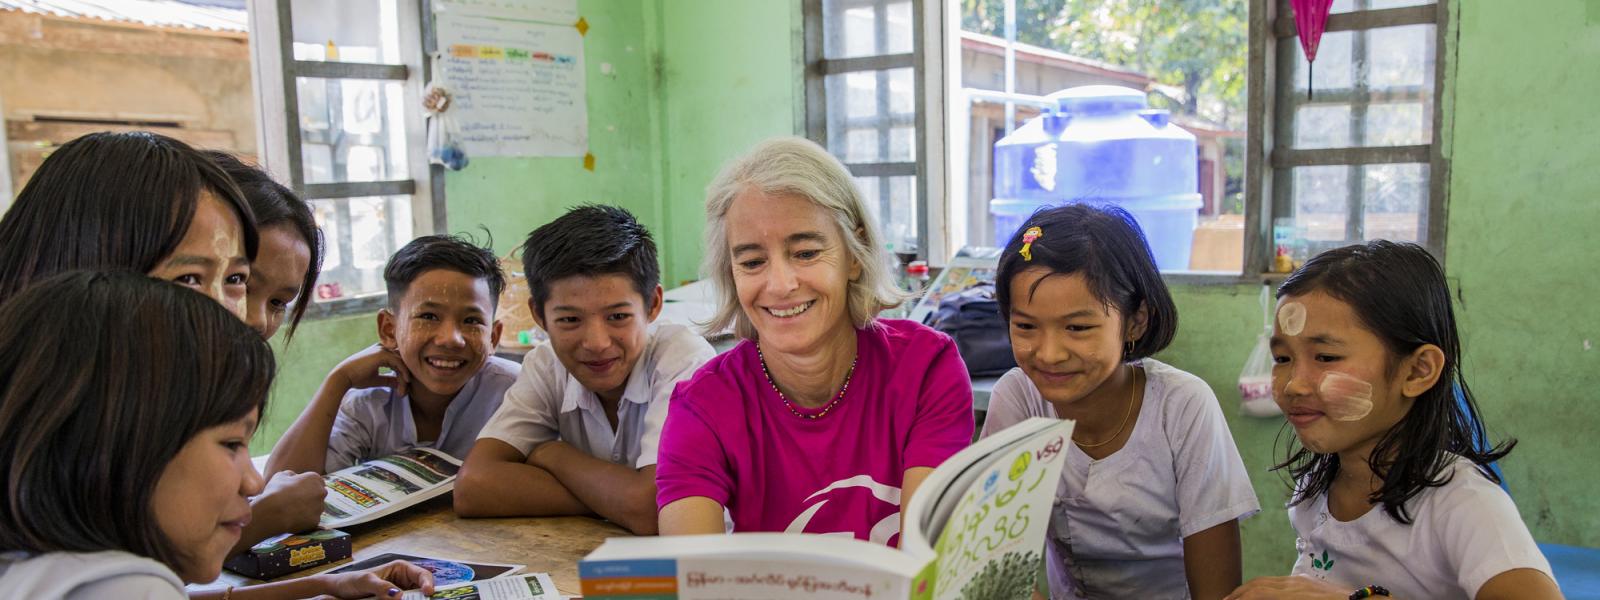 VSO Volunteer Ana Paula Pinto reads textbook and performs in classroom activity with the students from primary school at Kyakathone primary school, Myanmar